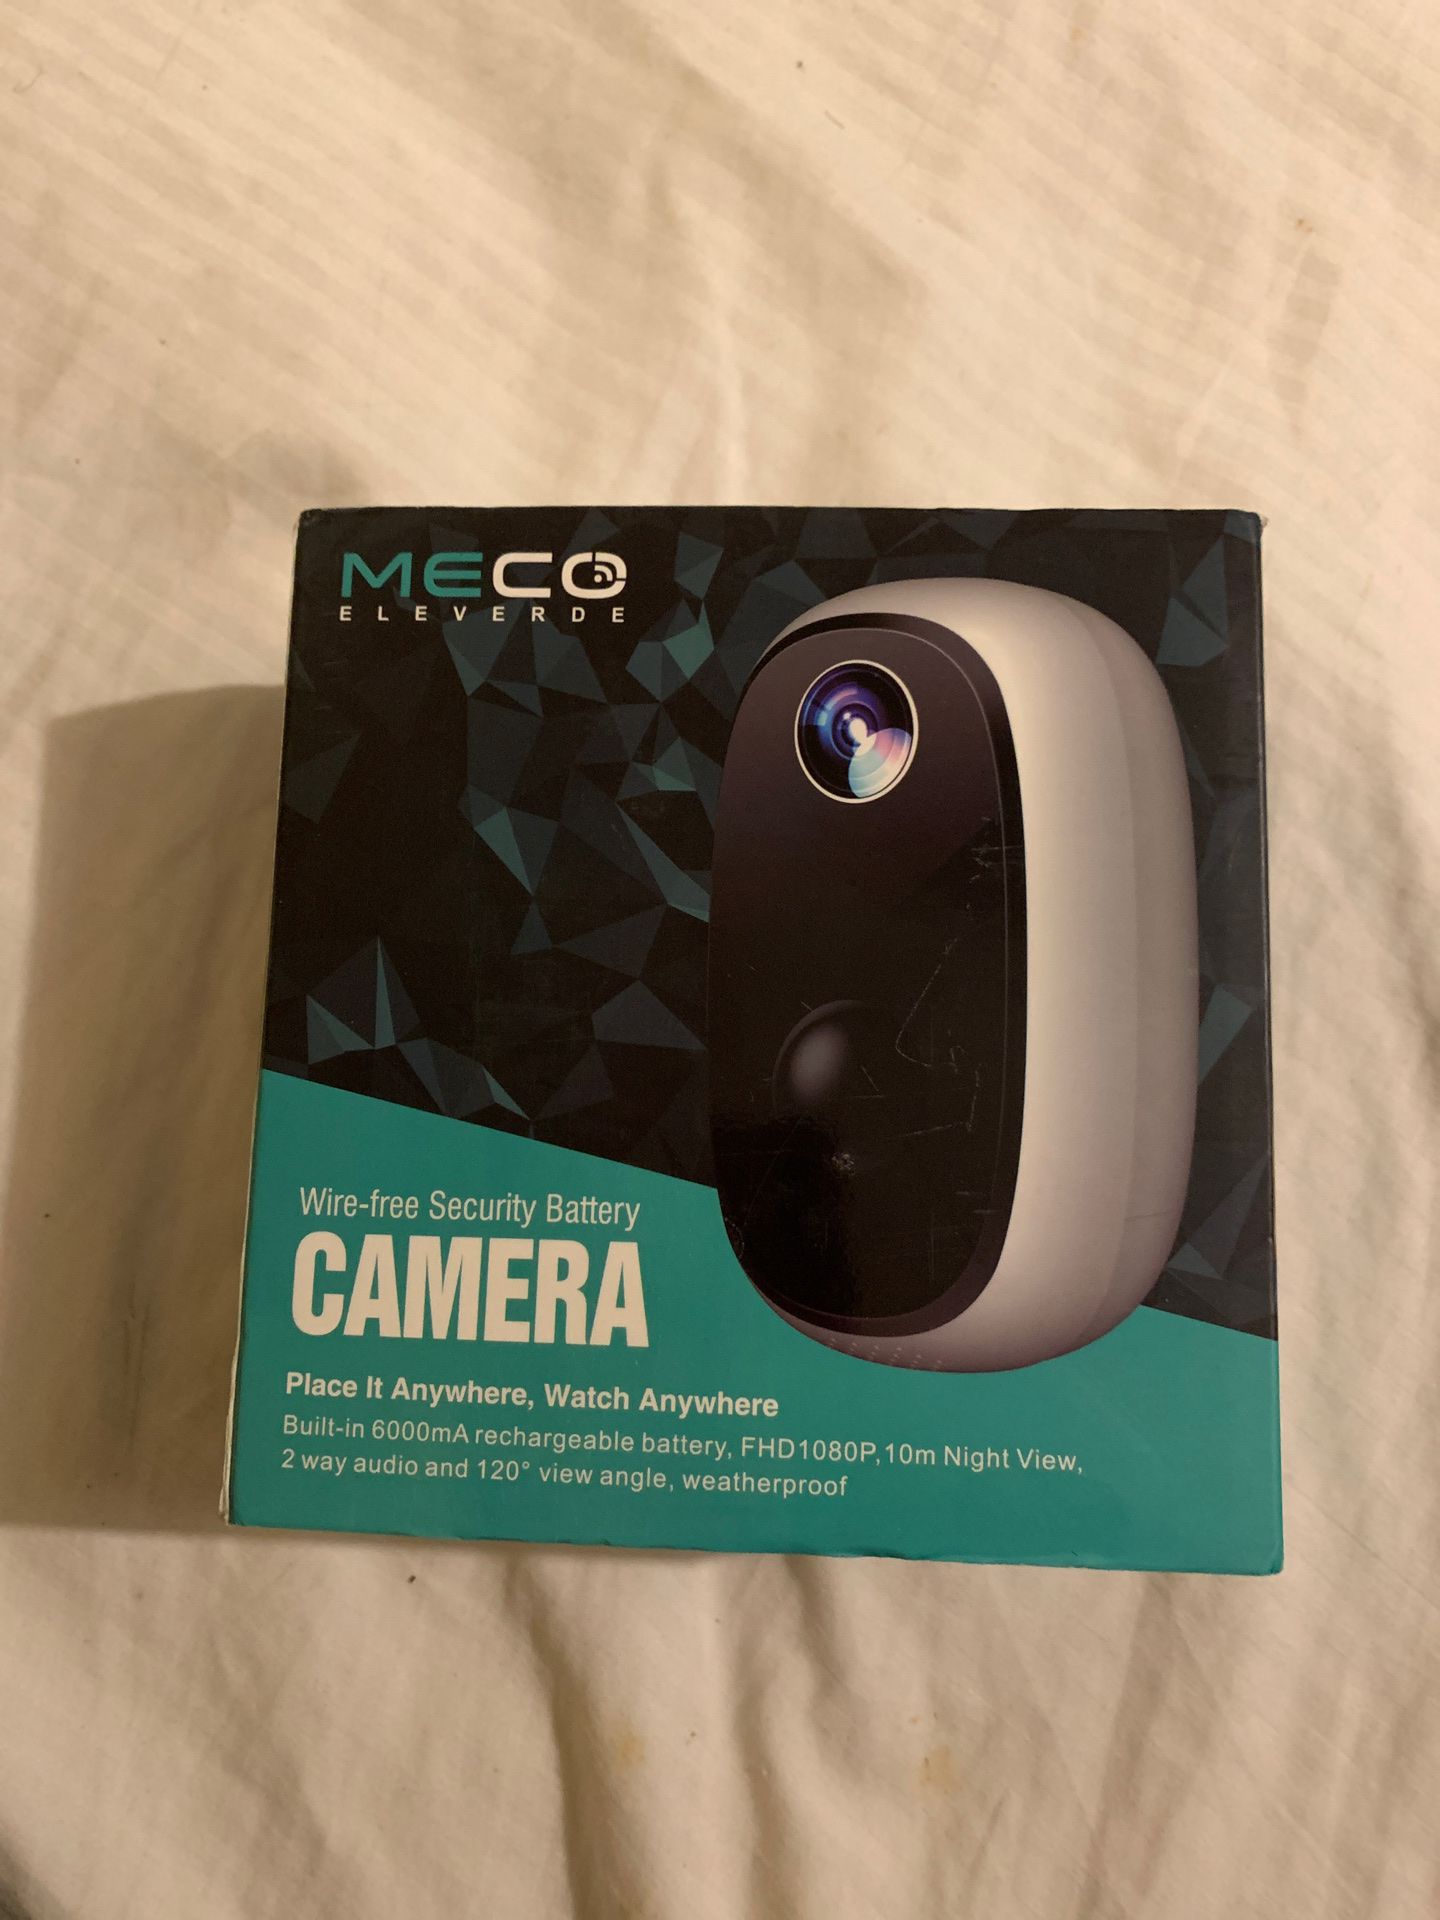 Meco Eleverde wire-free security battery CAMERA